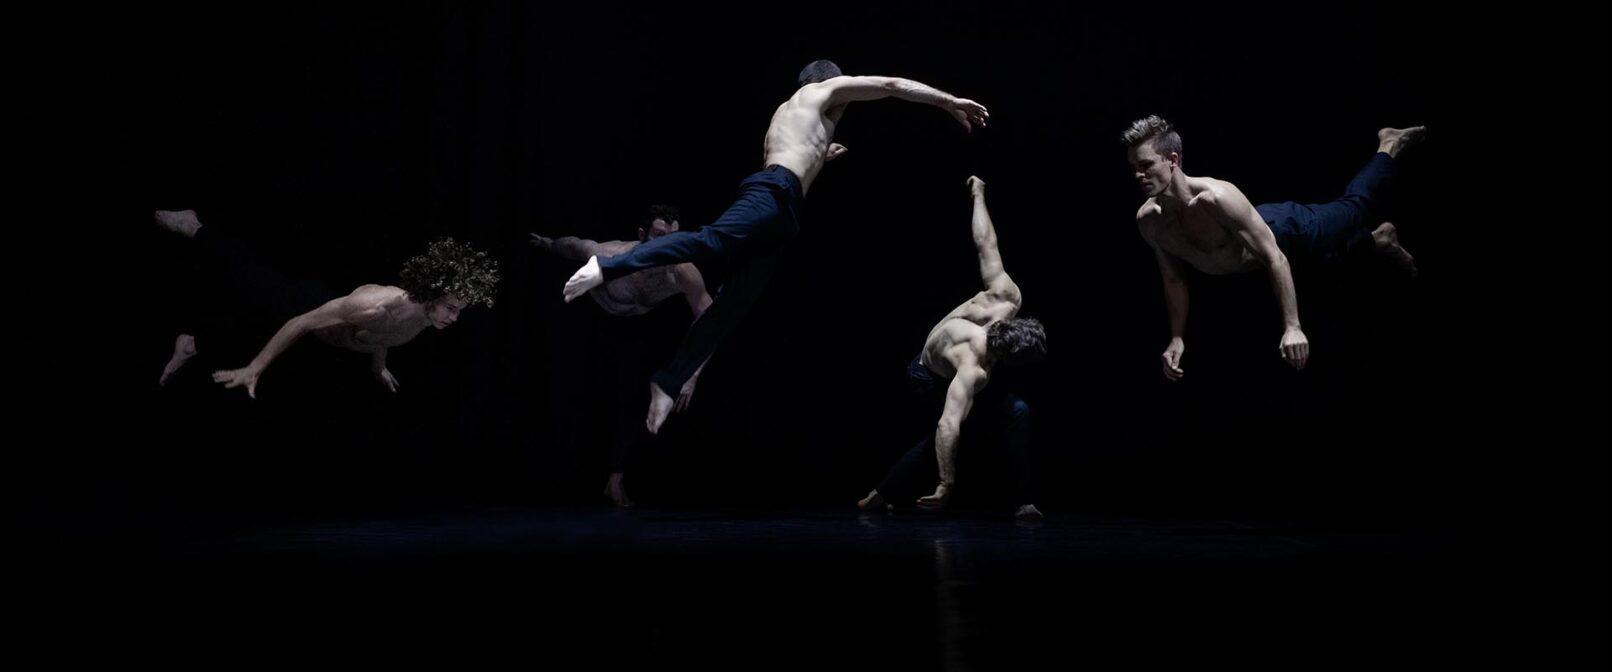 Circa. A group of five, shirtless, fair skinned male dancers in dark blue trousers. Three leap so that their bodies are parallel to the stage and the other two bend forward with arms stretched downward. They are lit against a dark background.